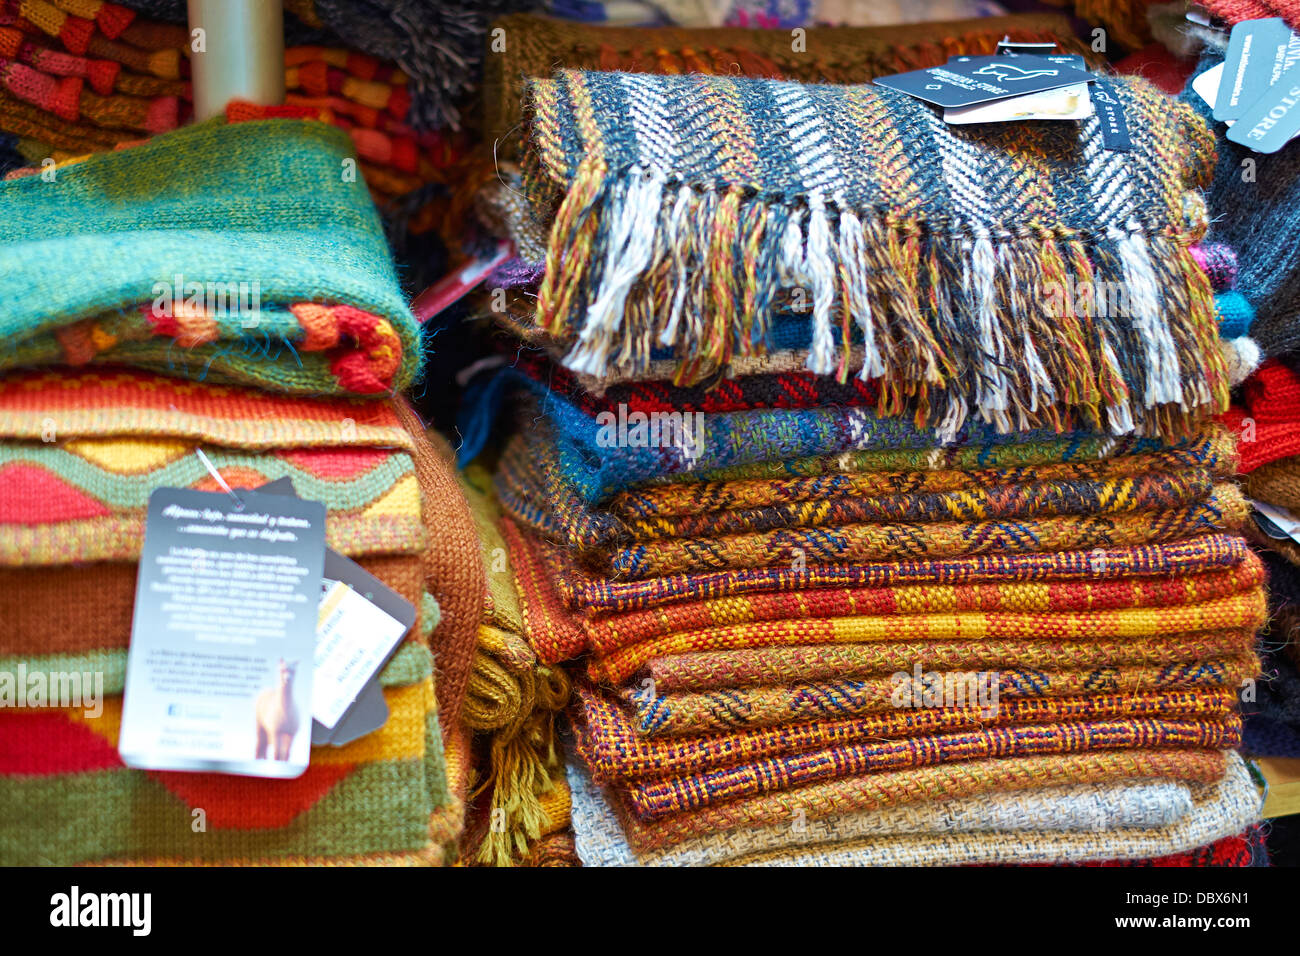 Pile of colourful alpaca wool scarfes, Miraflores district of Lima, Peru. Stock Photo